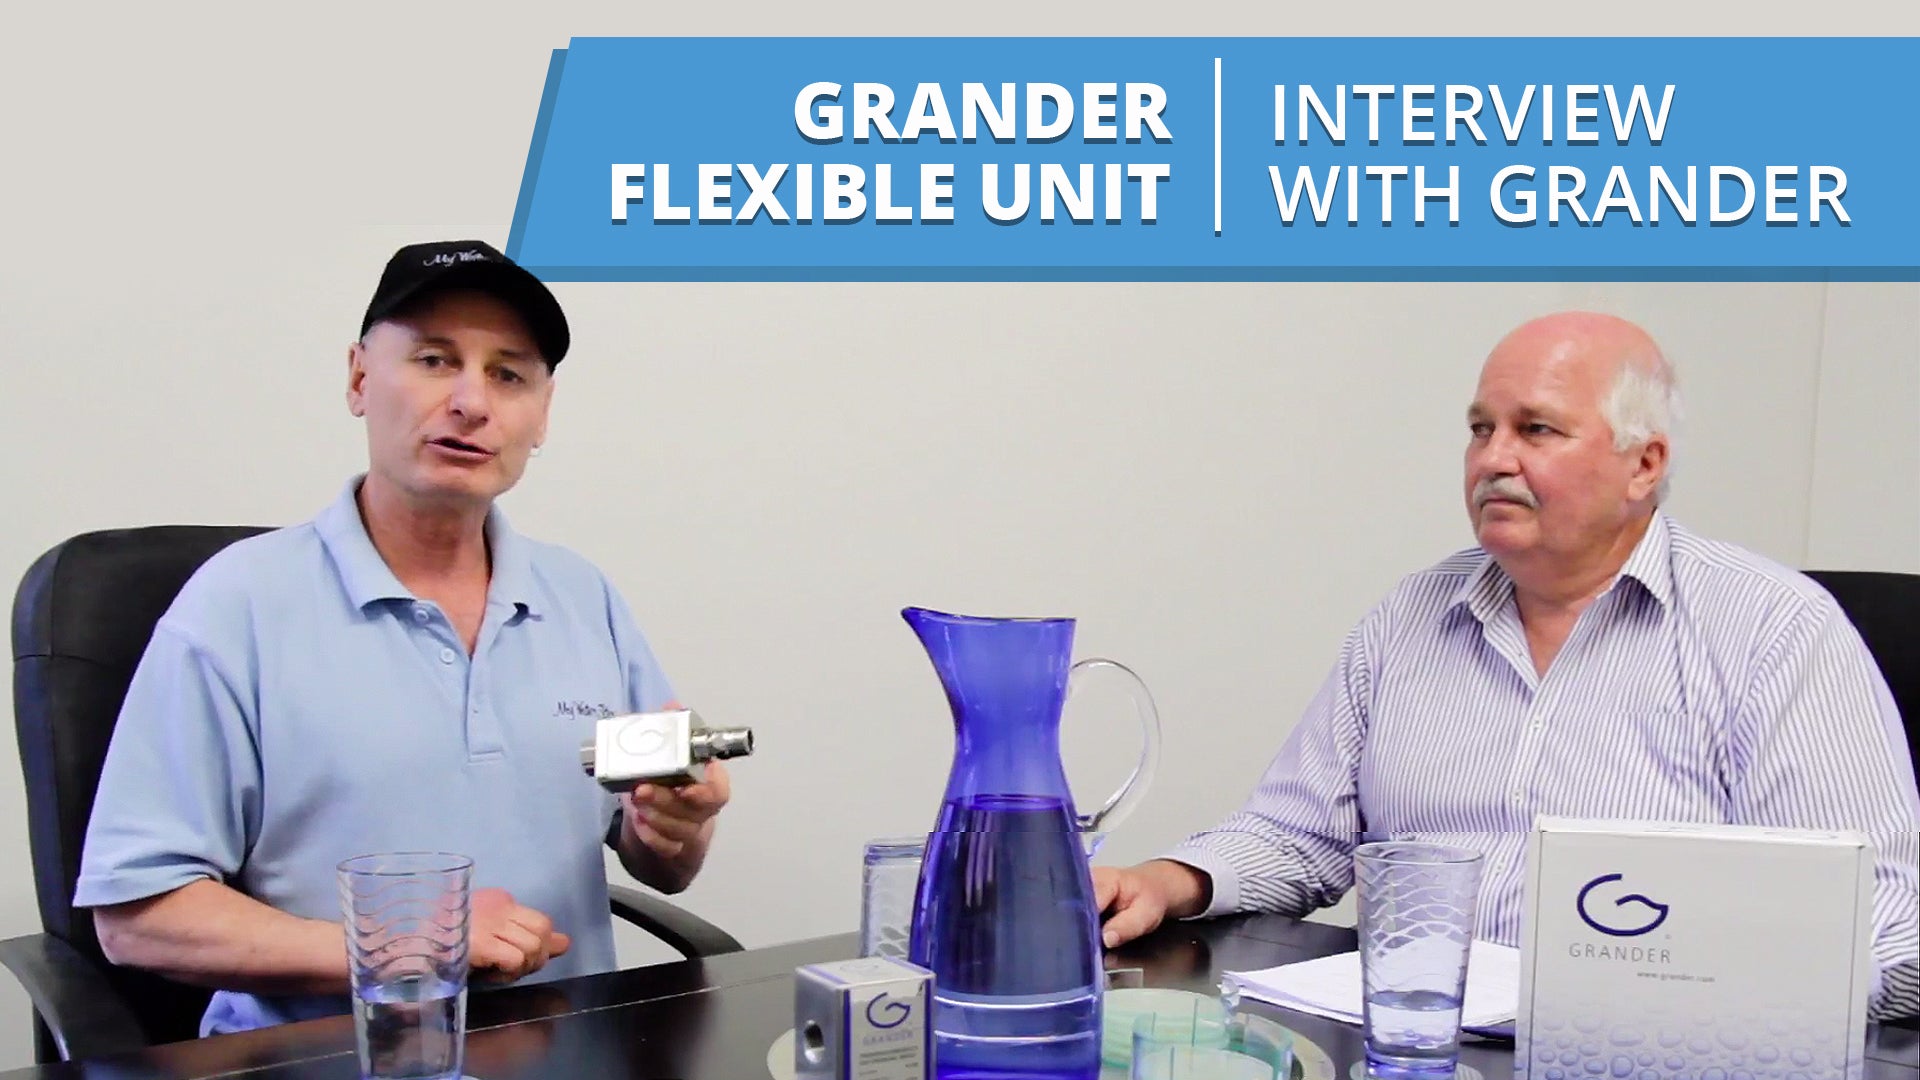 [VIDEO] Grander Flexible Unit - Interview with Wayne from Grander